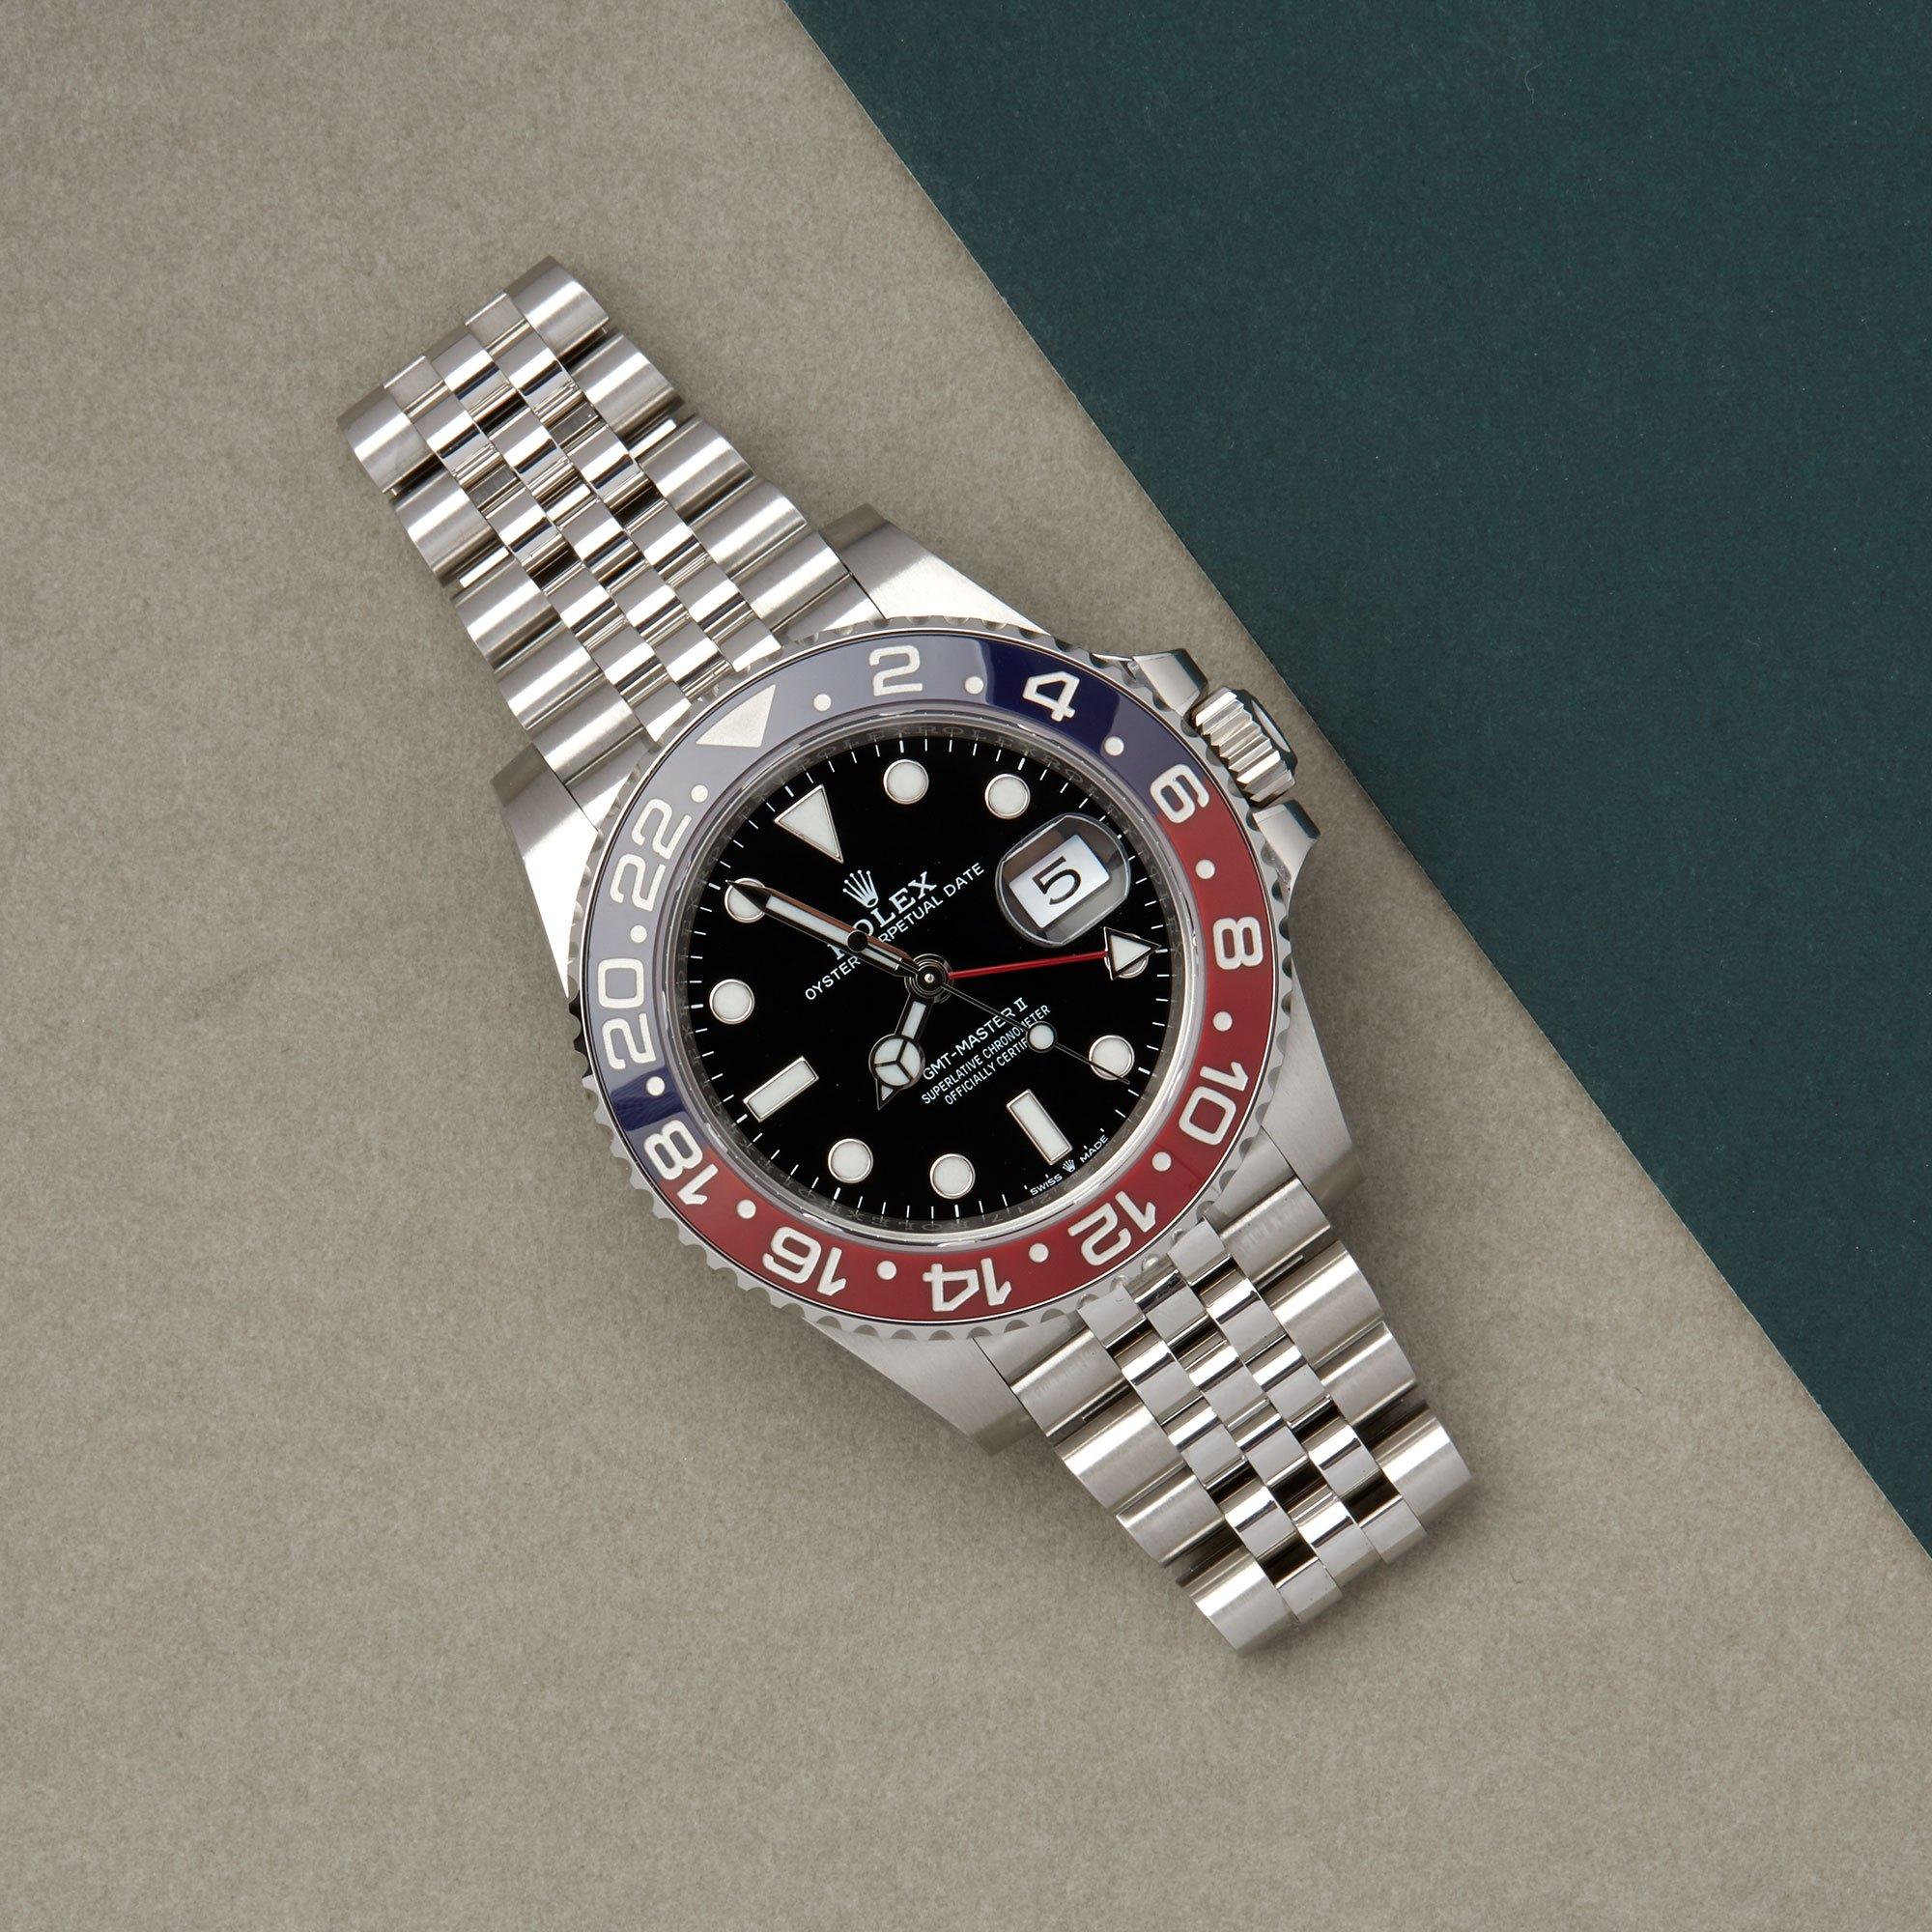 Xupes Reference: W007761
Manufacturer: Rolex
Model: GMT-Master II
Model Variant: 0
Model Number: 126710BLRO
Age: 44106
Gender: Men
Complete With: Rolex Box, Manuals & Guarantee 
Dial: Black Baton
Glass: Sapphire Crystal
Case Size: 40mm
Case